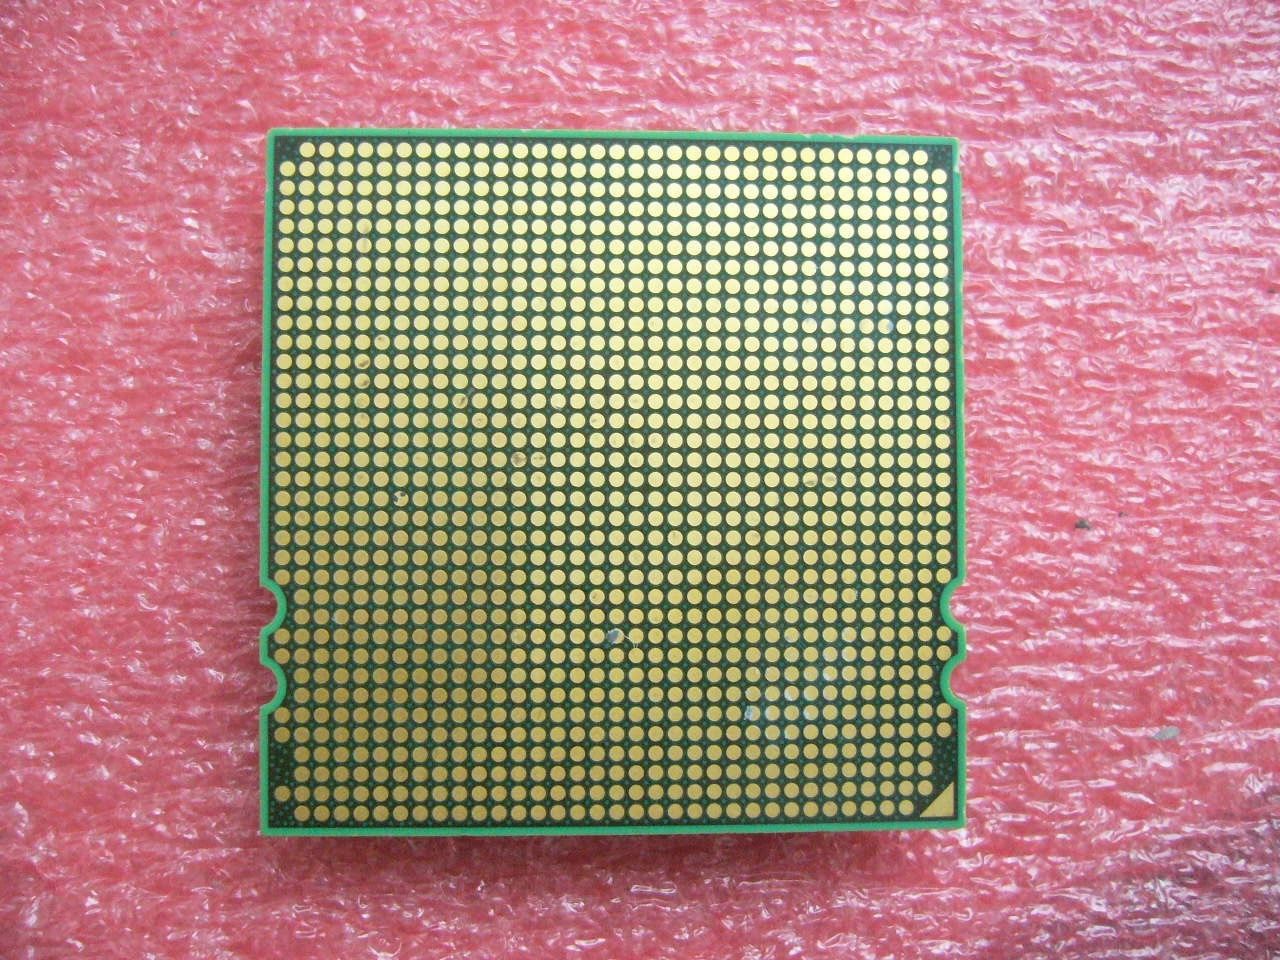 QTY 1x AMD Opteron 2354 2.2 GHz Quad-Core (OS2354WAL4BGH) CPU Socket F 1207 - Click Image to Close